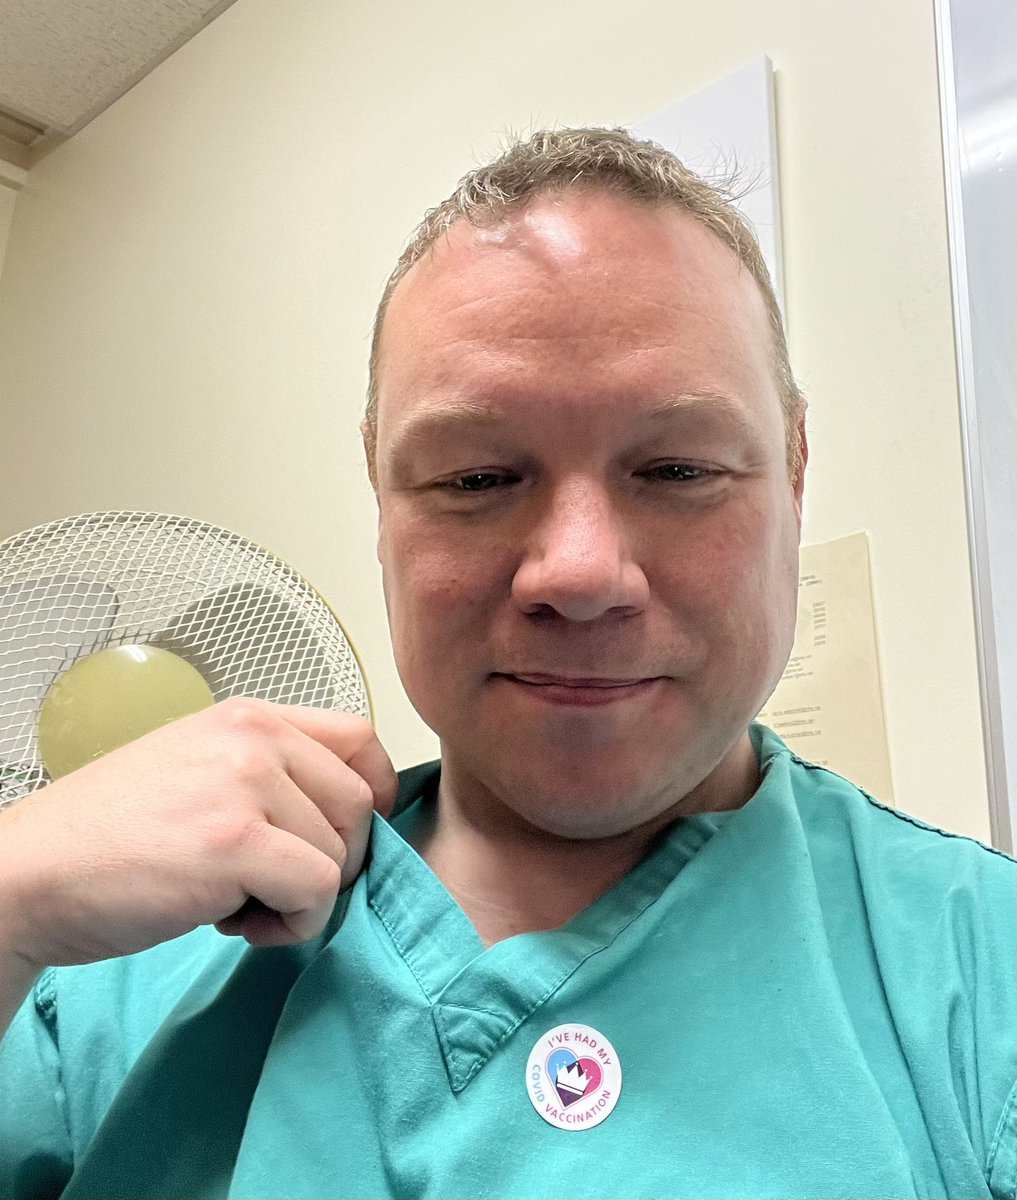 Many thanks to the @NewcastleHosps Vaccination service working late and weekend hours tonight to support the staff vaccination programme and to keep our health service functioning this winter. #doublevaxxed